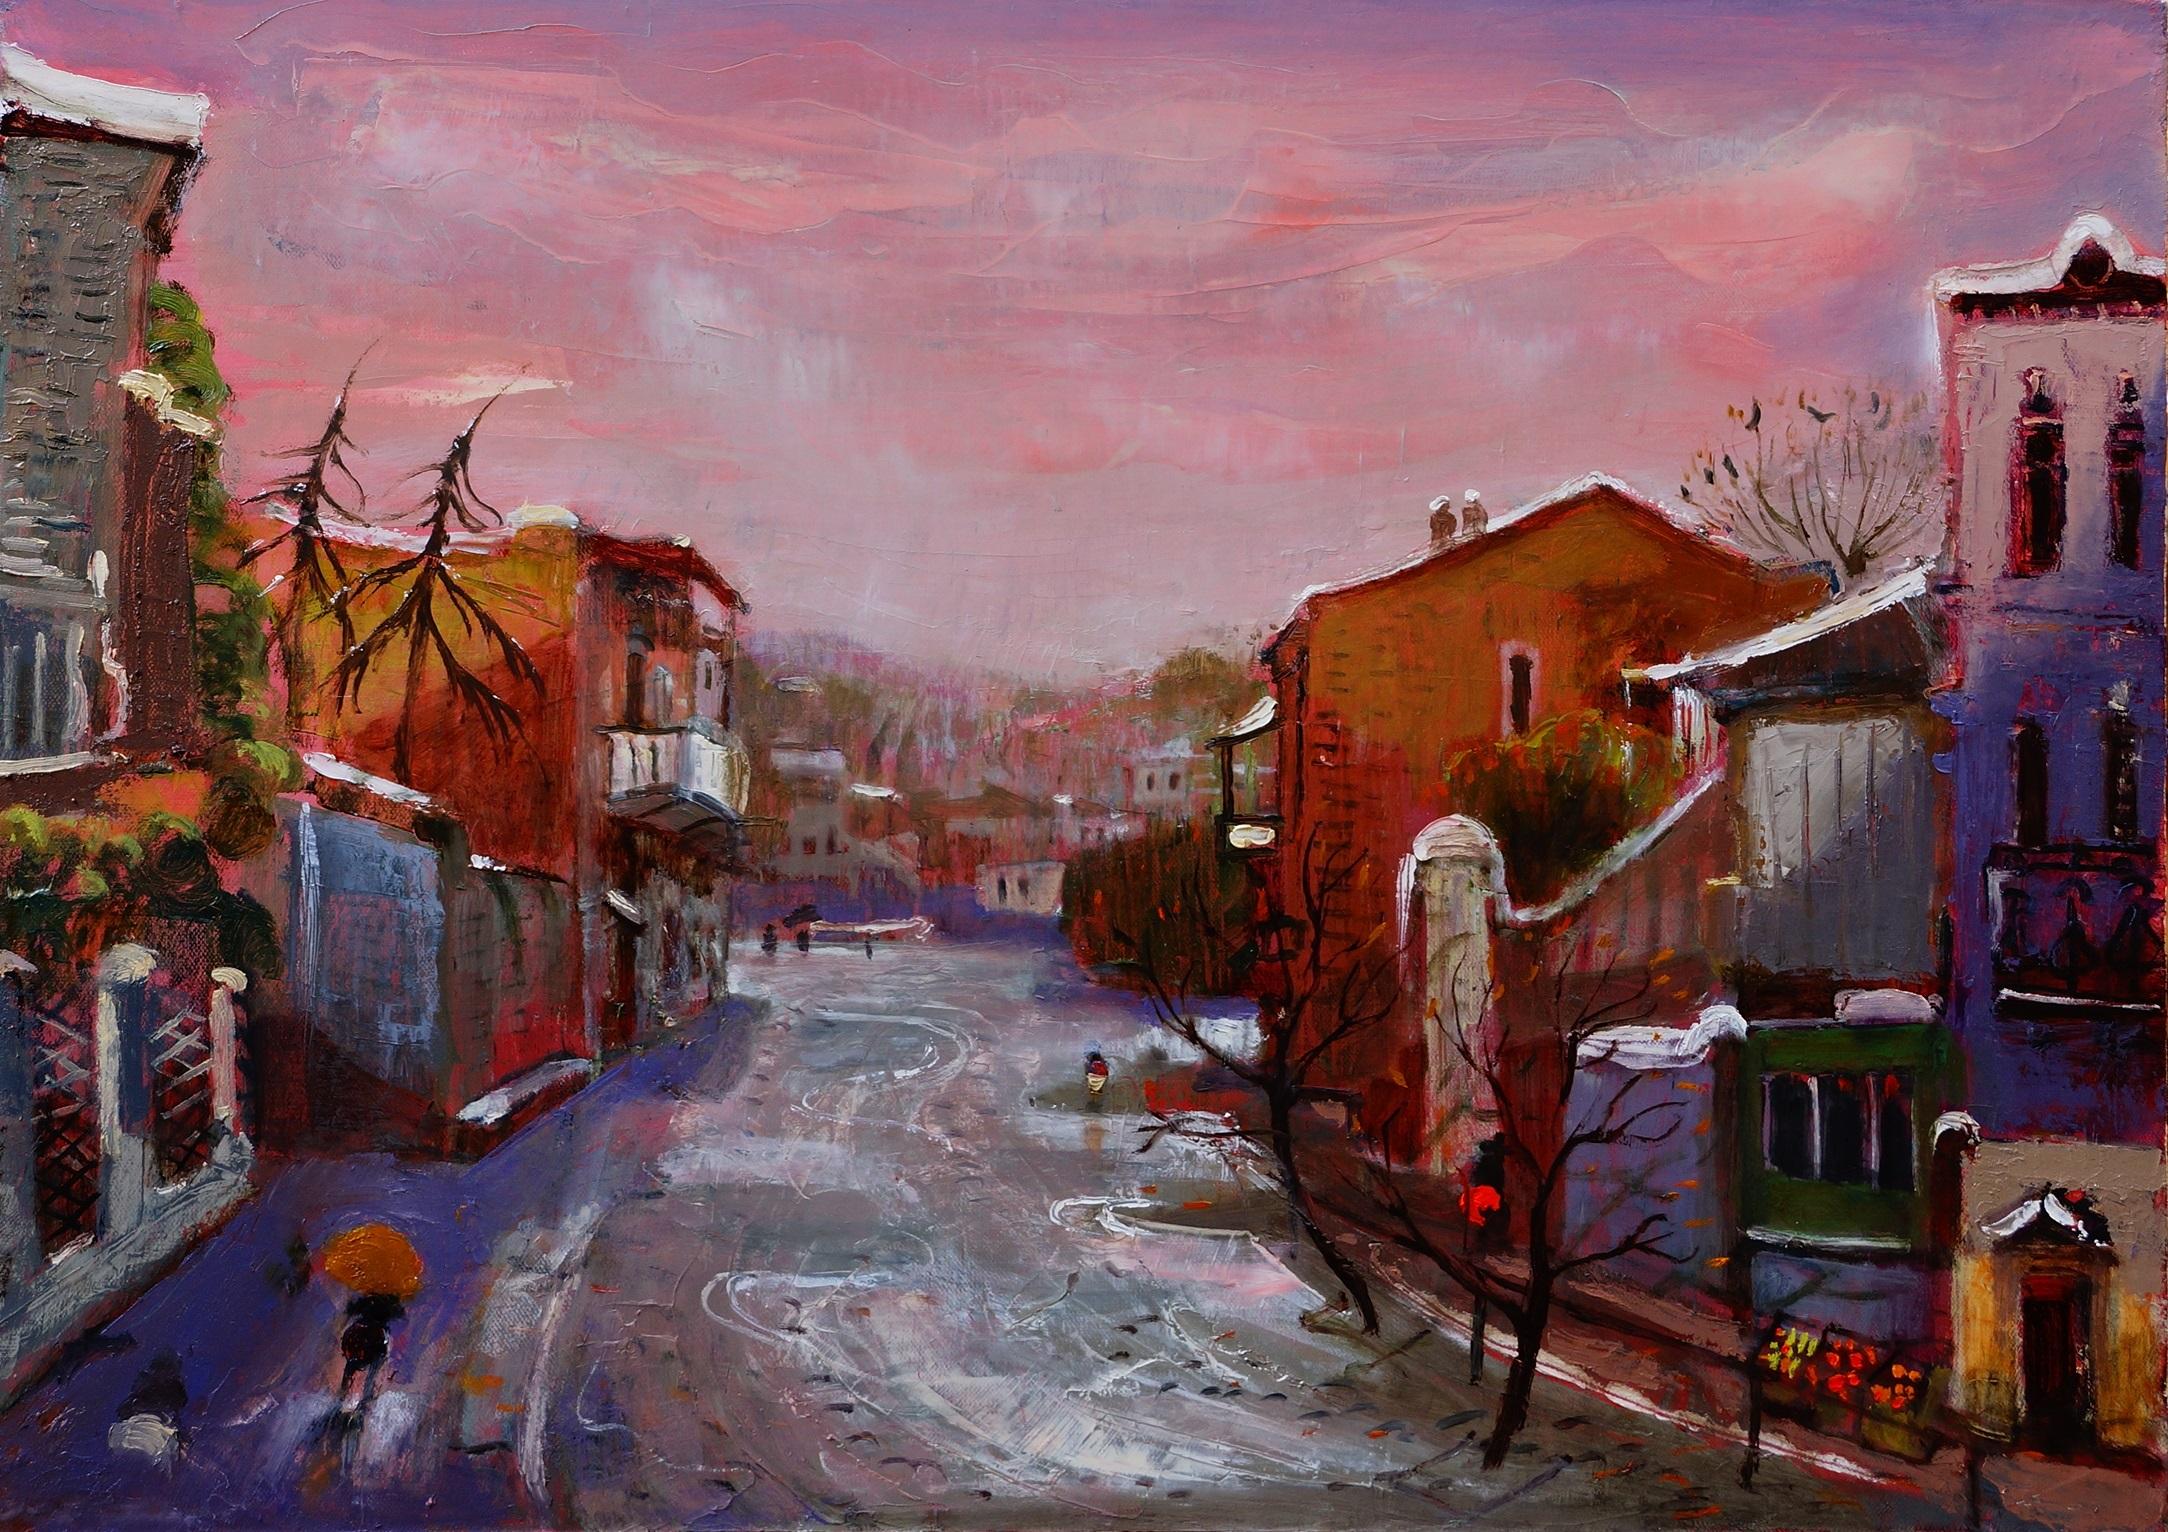 Oil on canvas

Giorgi Kukhalashvili is a Georgian artist born in 1982 who lives and works in Tbilisi, Georgia. He's founder of the organization “Language of Art". In 2002, he finished Iakob Nikoladze Art College in Tbilisi. In 1998, in the period of